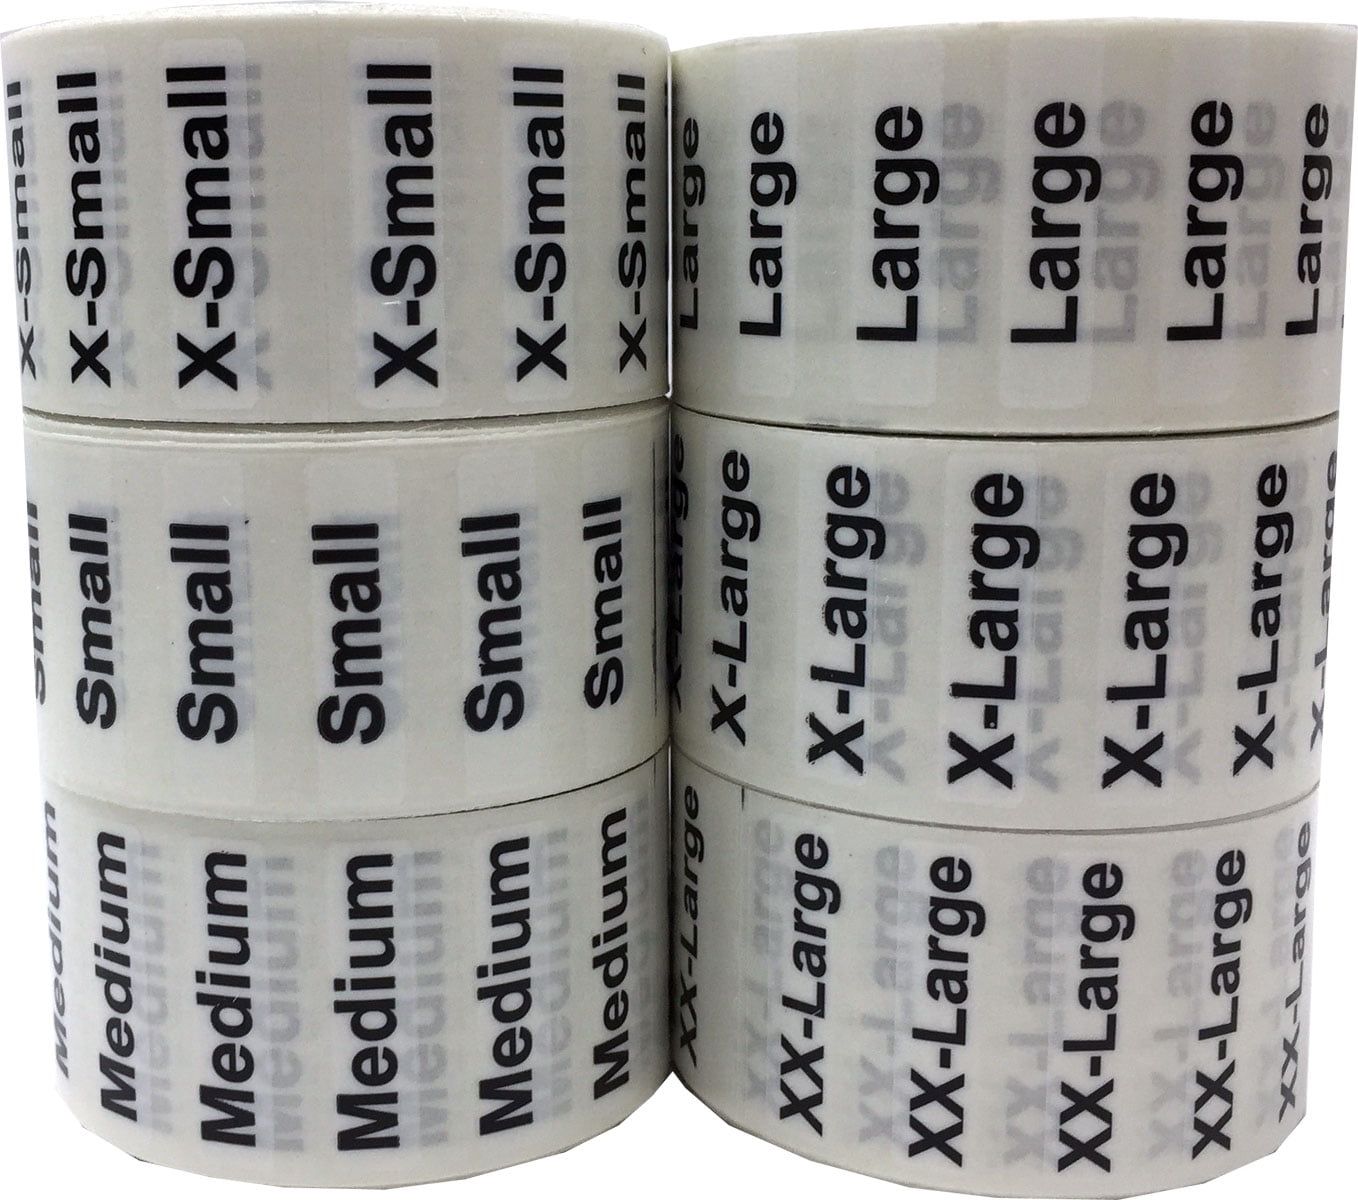 Bright Red Roll of 50 Labels "Free Gift" 1.25 in x 0.75 in Oval Stickers 